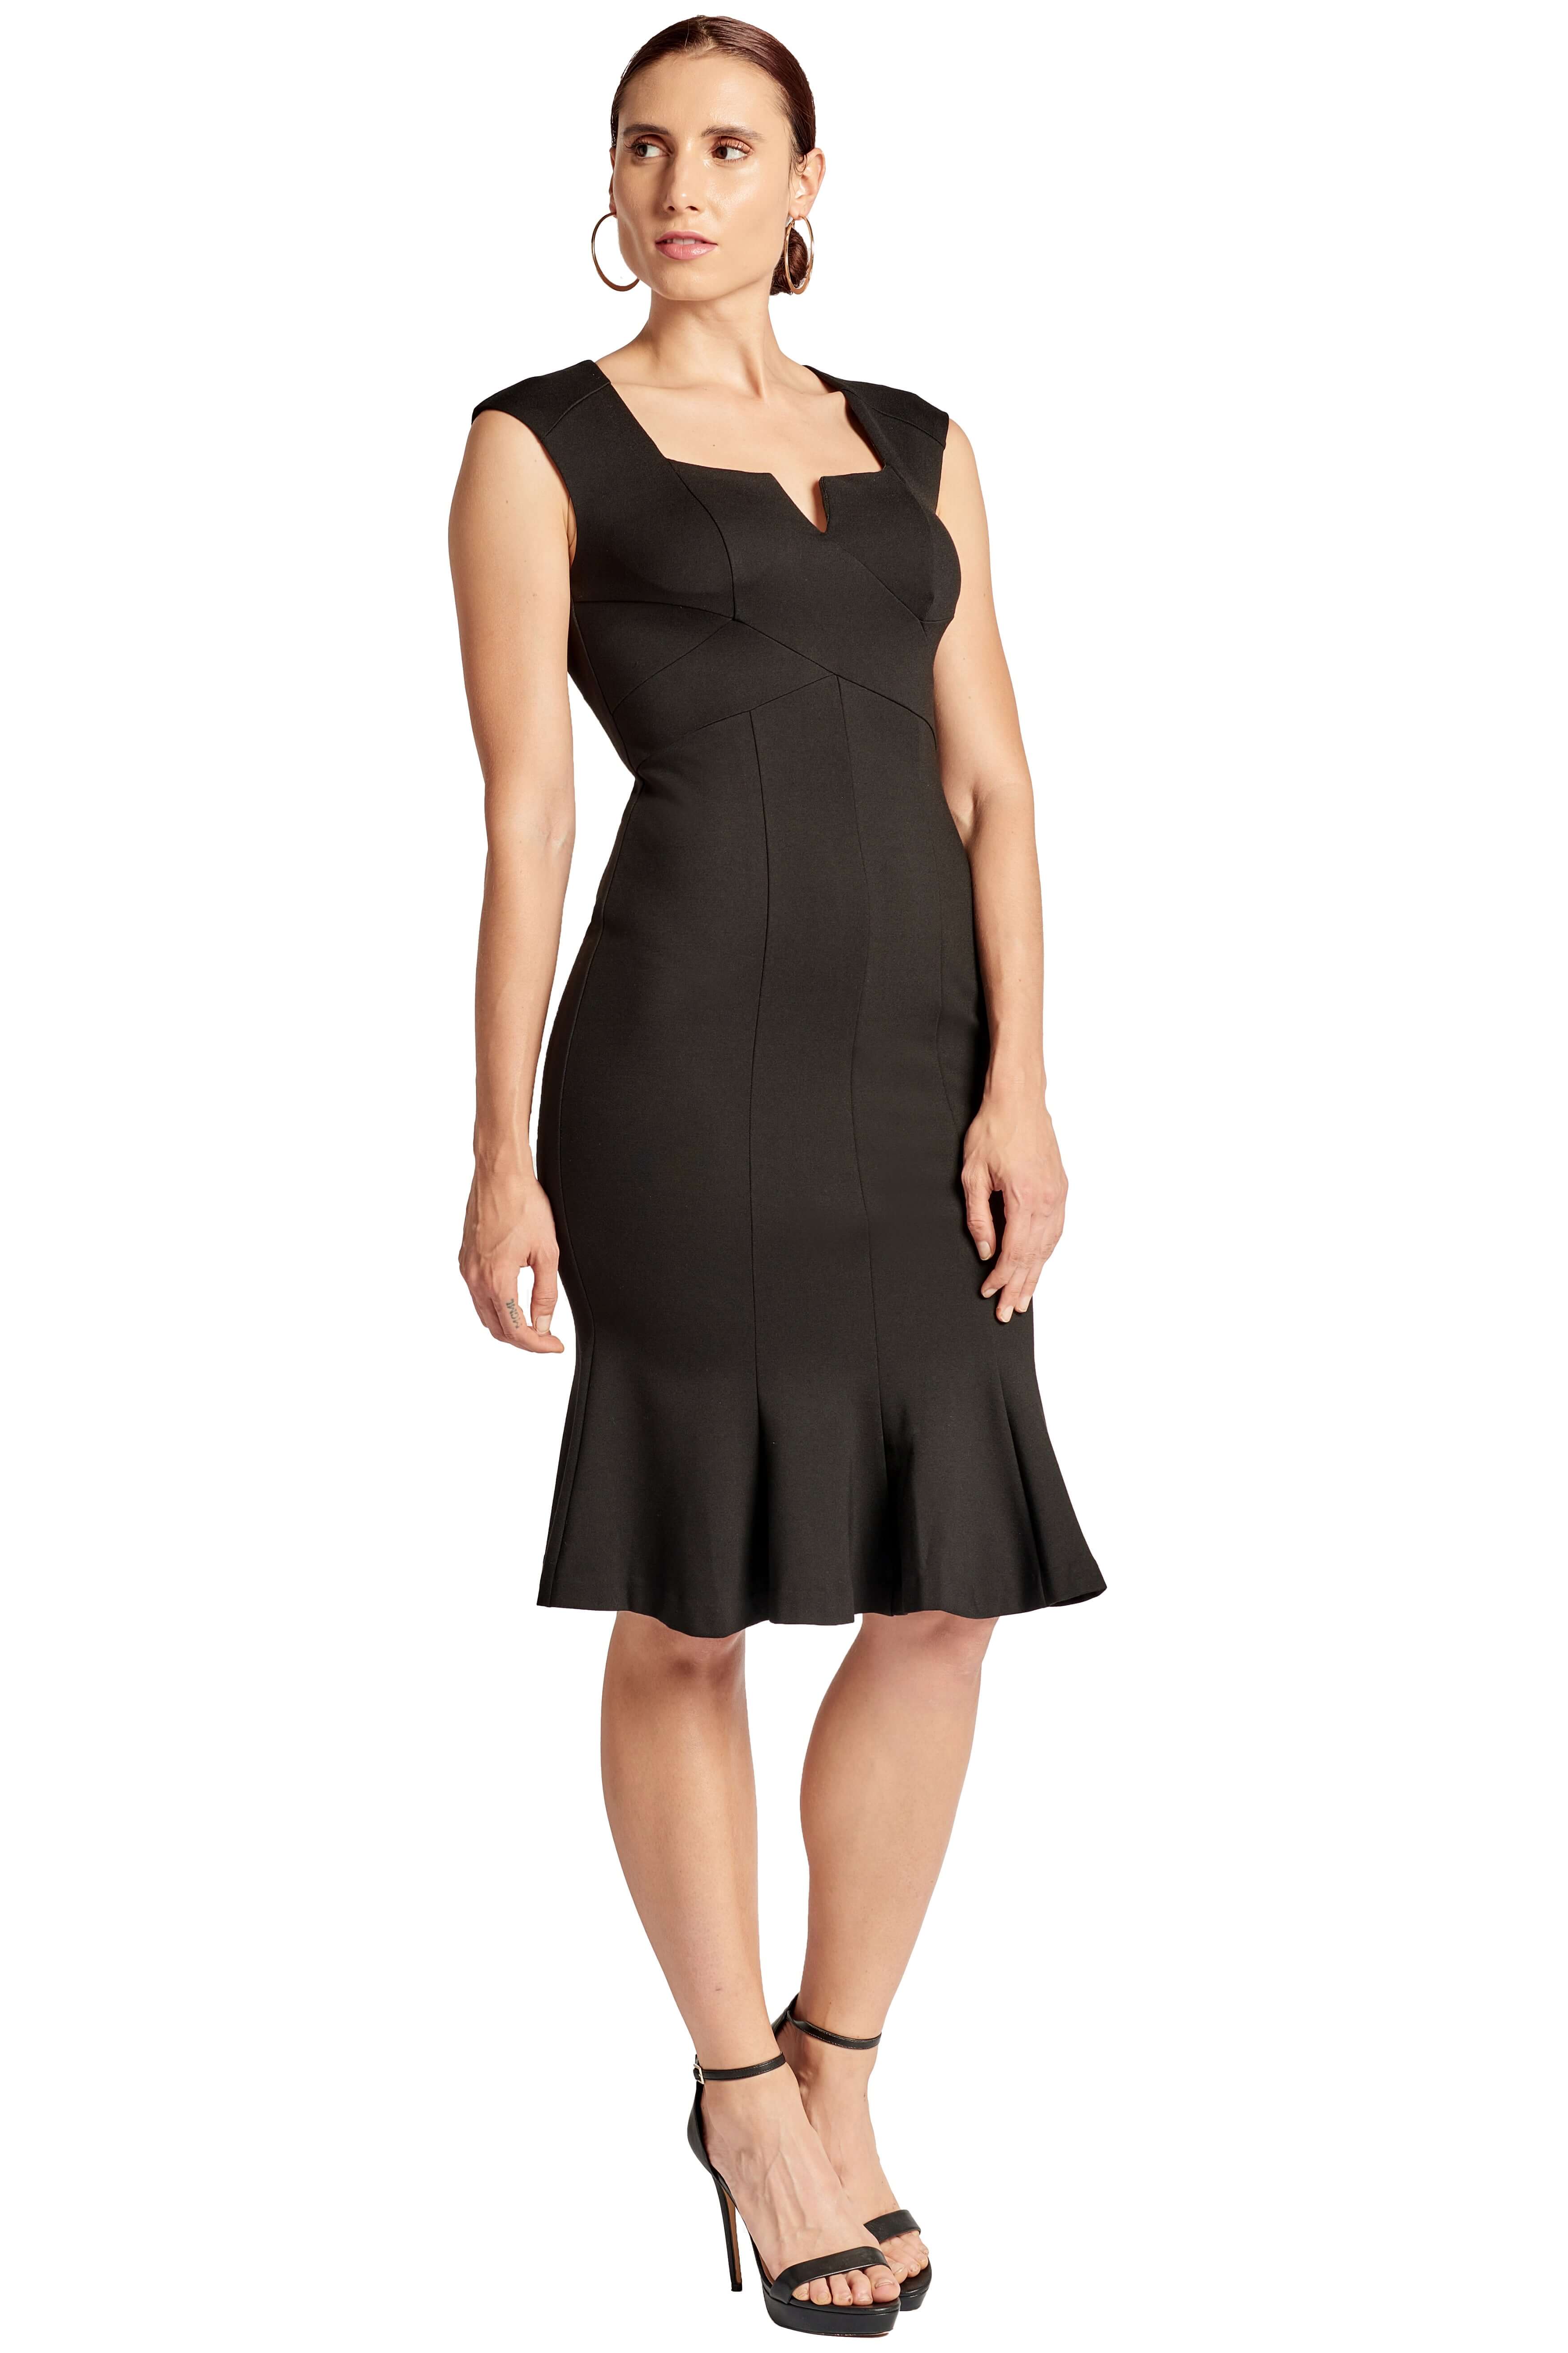 3/4 front view of model wearing the Simona Maghen Ivy Dress, black form-fitting seamed sleeveless square notch neck midi dress with mermaid hem.